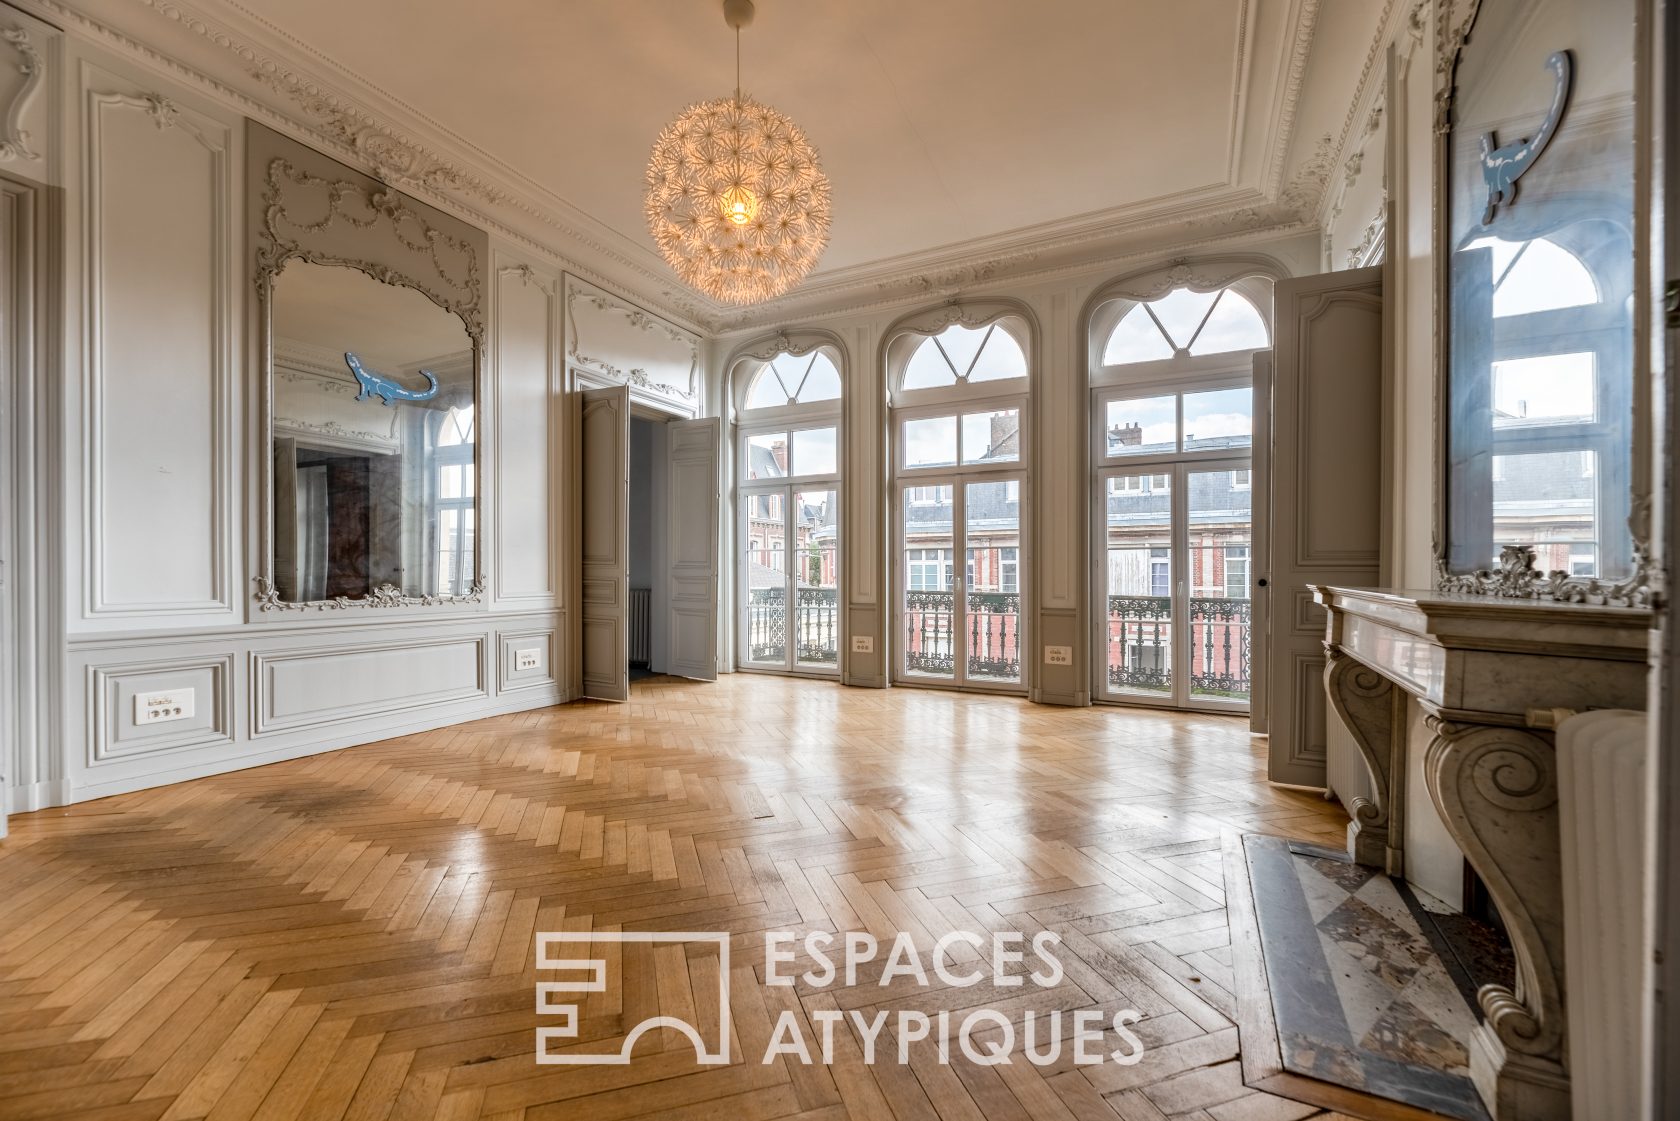 Splendid private mansion from the 1800s in the city of 100 bell towers